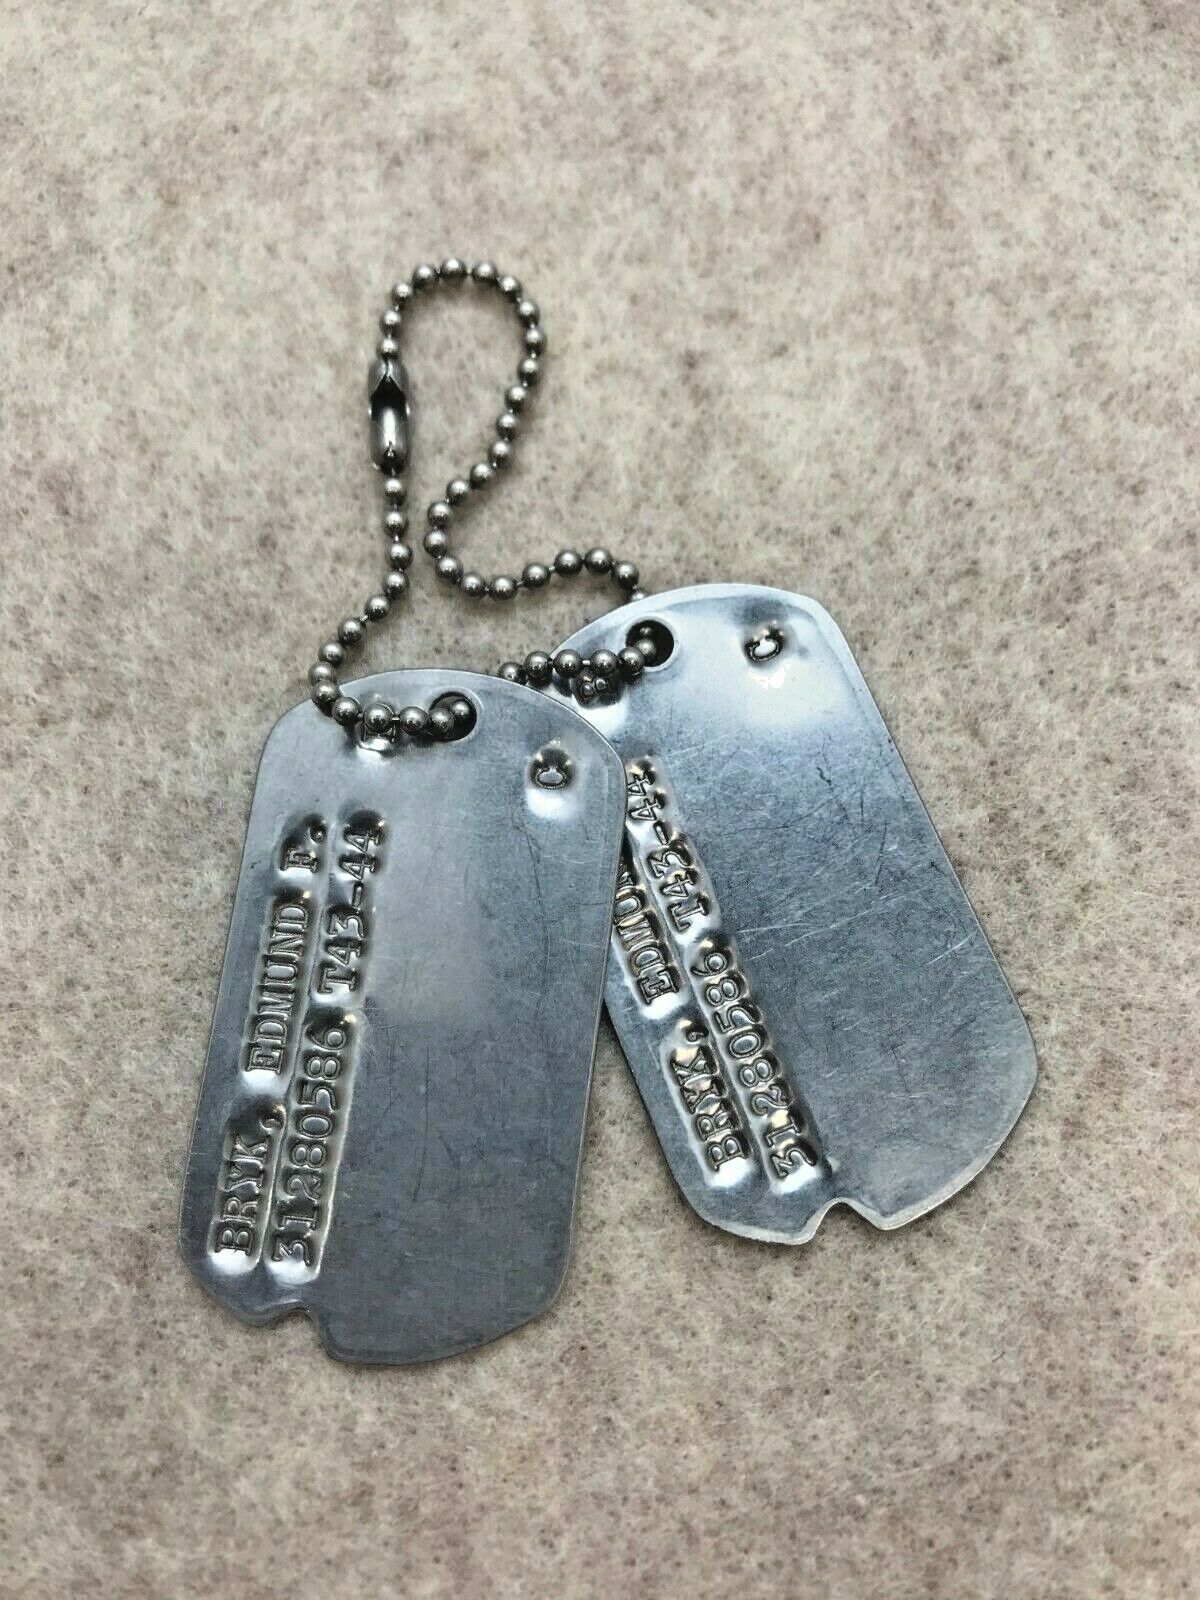 RARE WW2 ERA SOLDIER DOG TAGS  - ID TO SOLDIER BRYK - SOLDIER TAGS